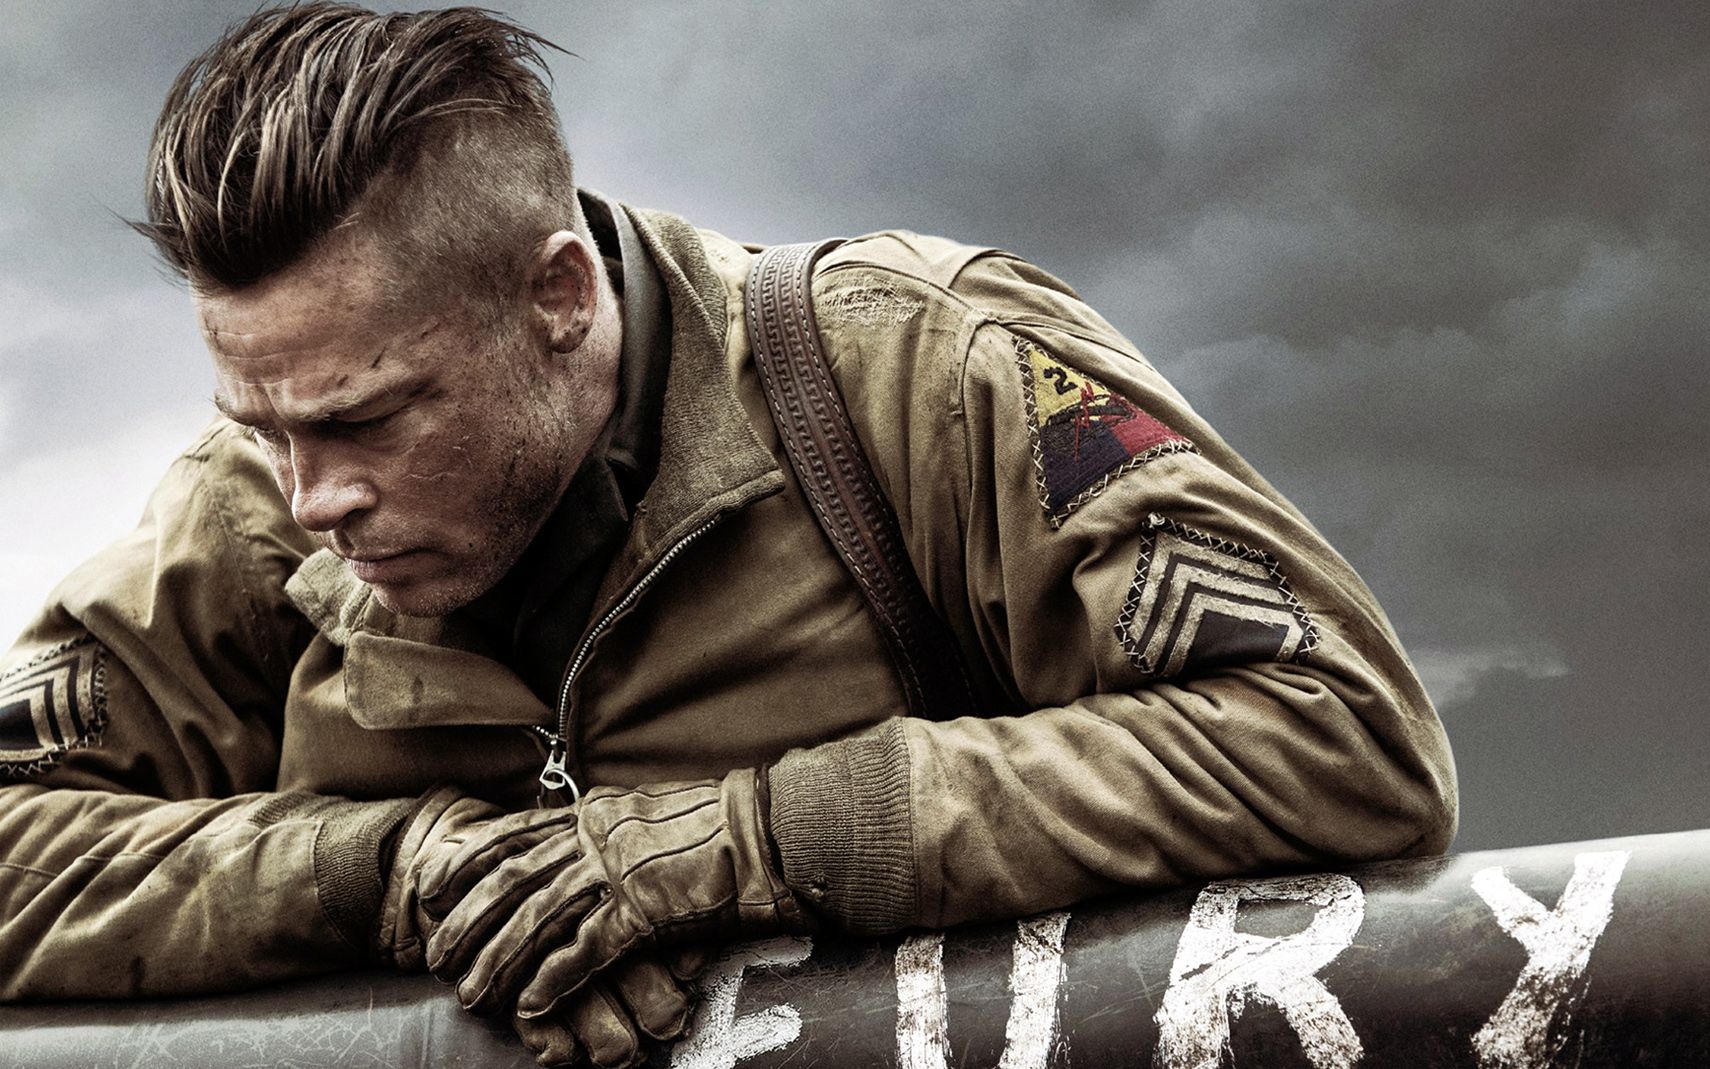 In Fury Movie Brad Pitt Played First Sergeant Don "Wardaddy" Collier, A Tank Commander Who Pushing Into The German Territory As The Final Part Of The Allied Advance